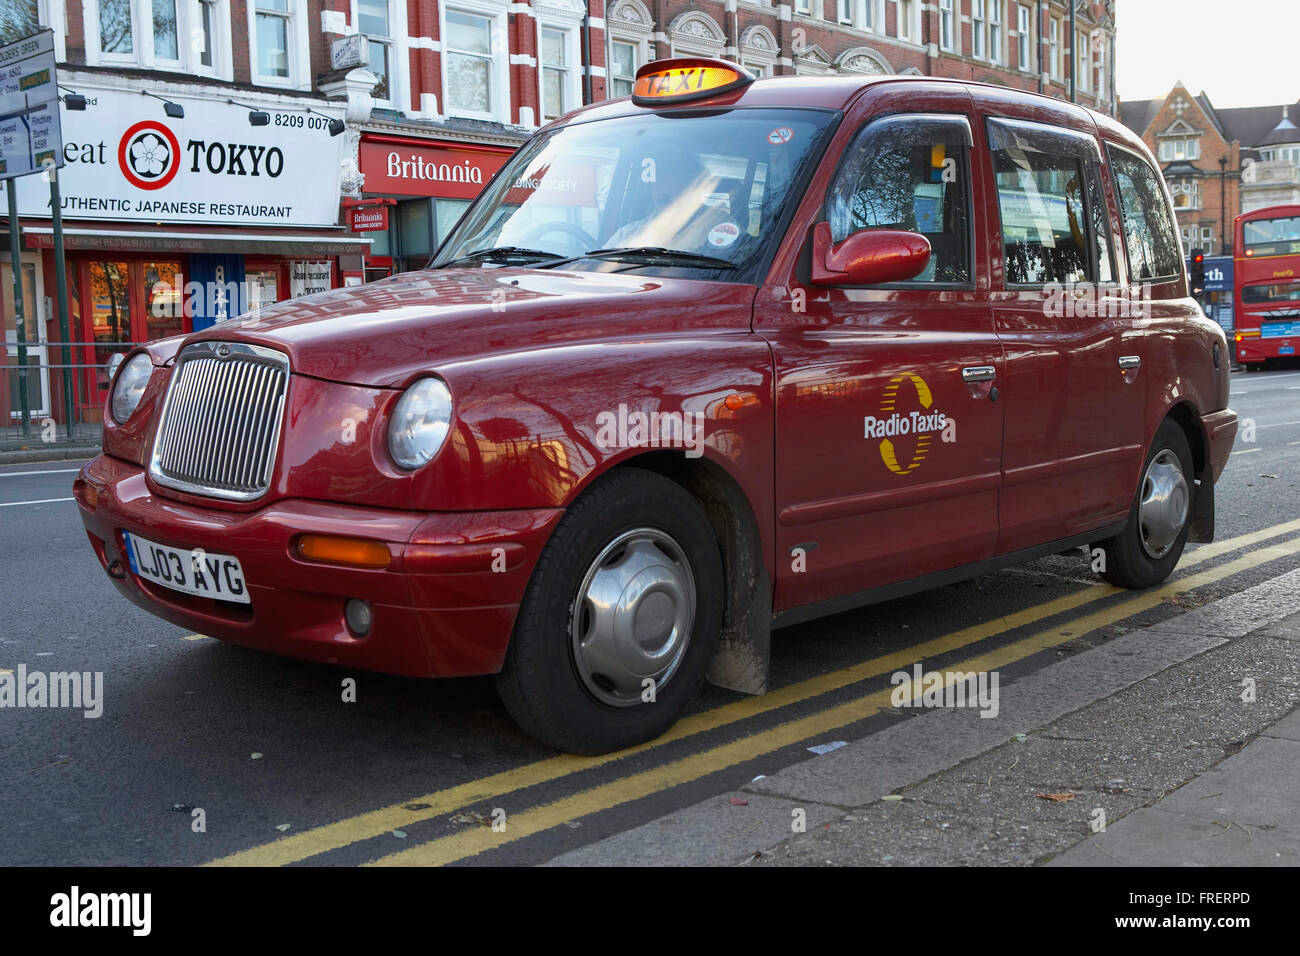 Europe Great Britain England London Red Taxi Cab With Light On